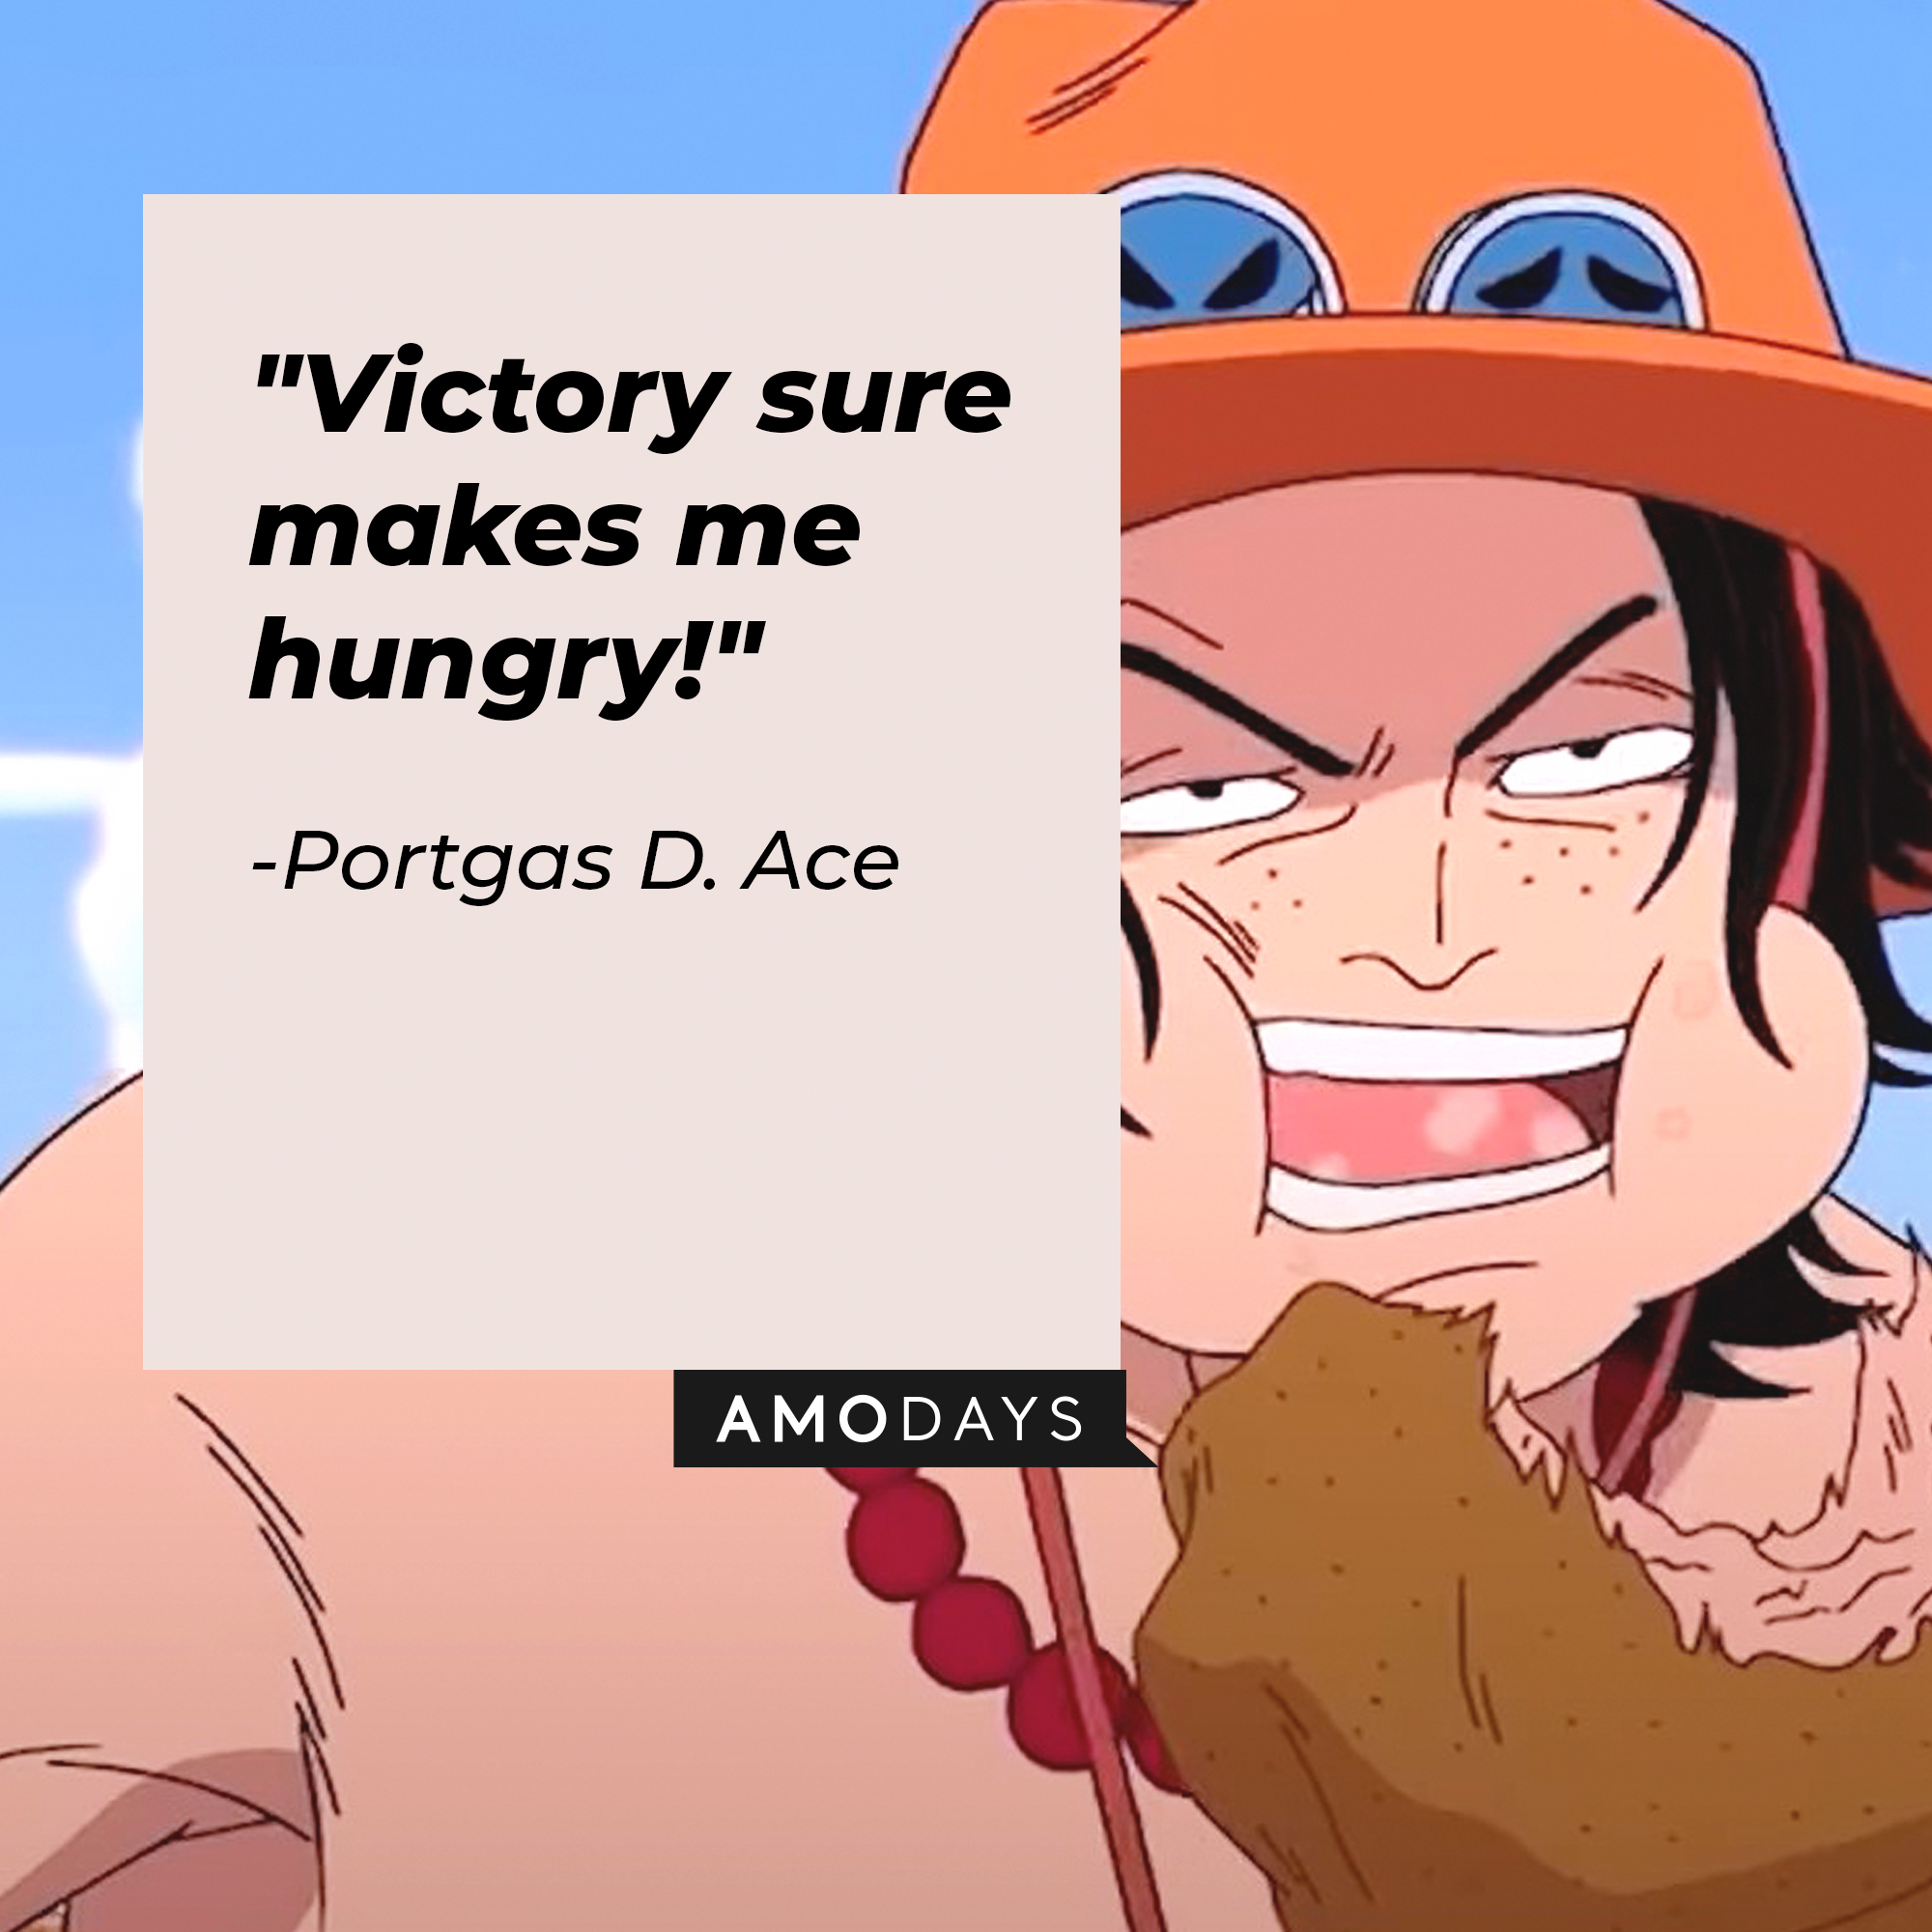 Portgas D. Ac with a text overlay reading, "Victory sure makes me hungry!" | Source: facebook.com/onepieceofficial